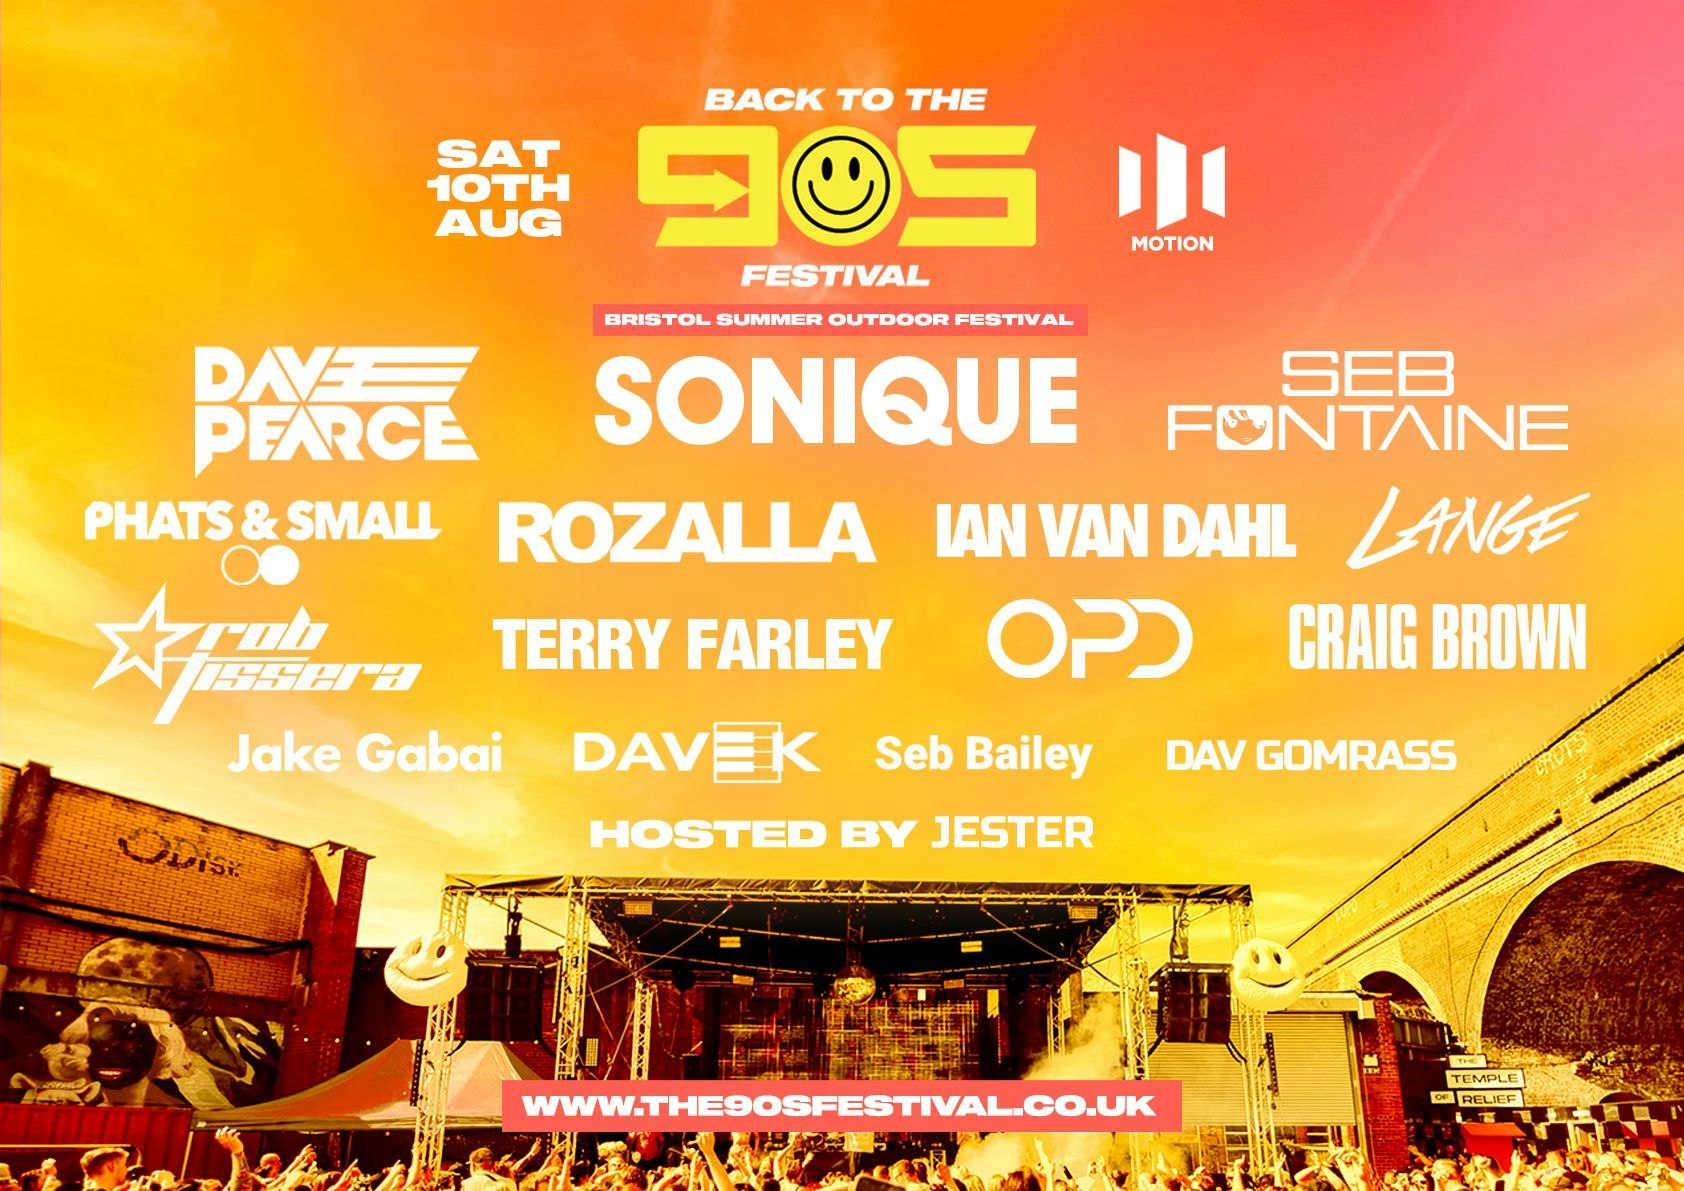 Back To The 90s – Summer Outdoor Festival – Motion [GENERAL ADMISSION TICKETS SELLING FAST!]